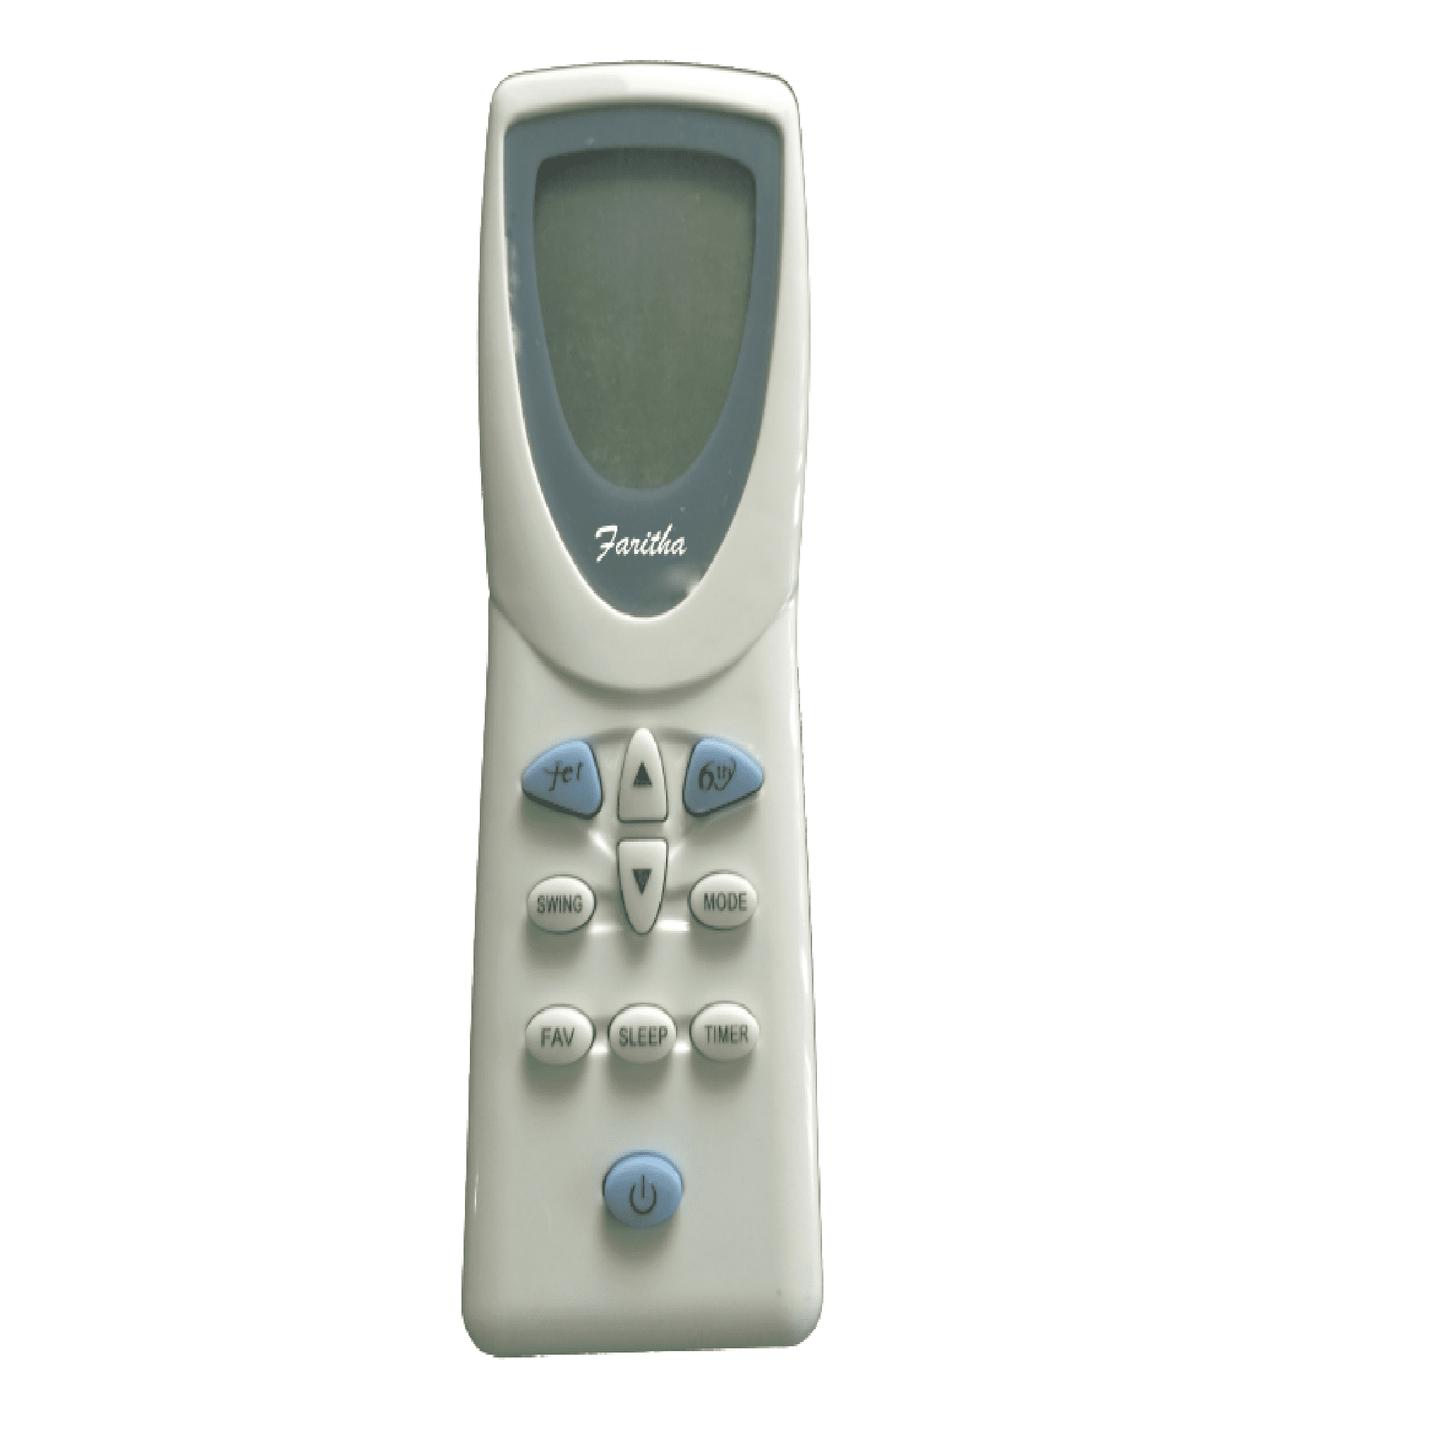 Whirlpool Aircondition Remote Control 41